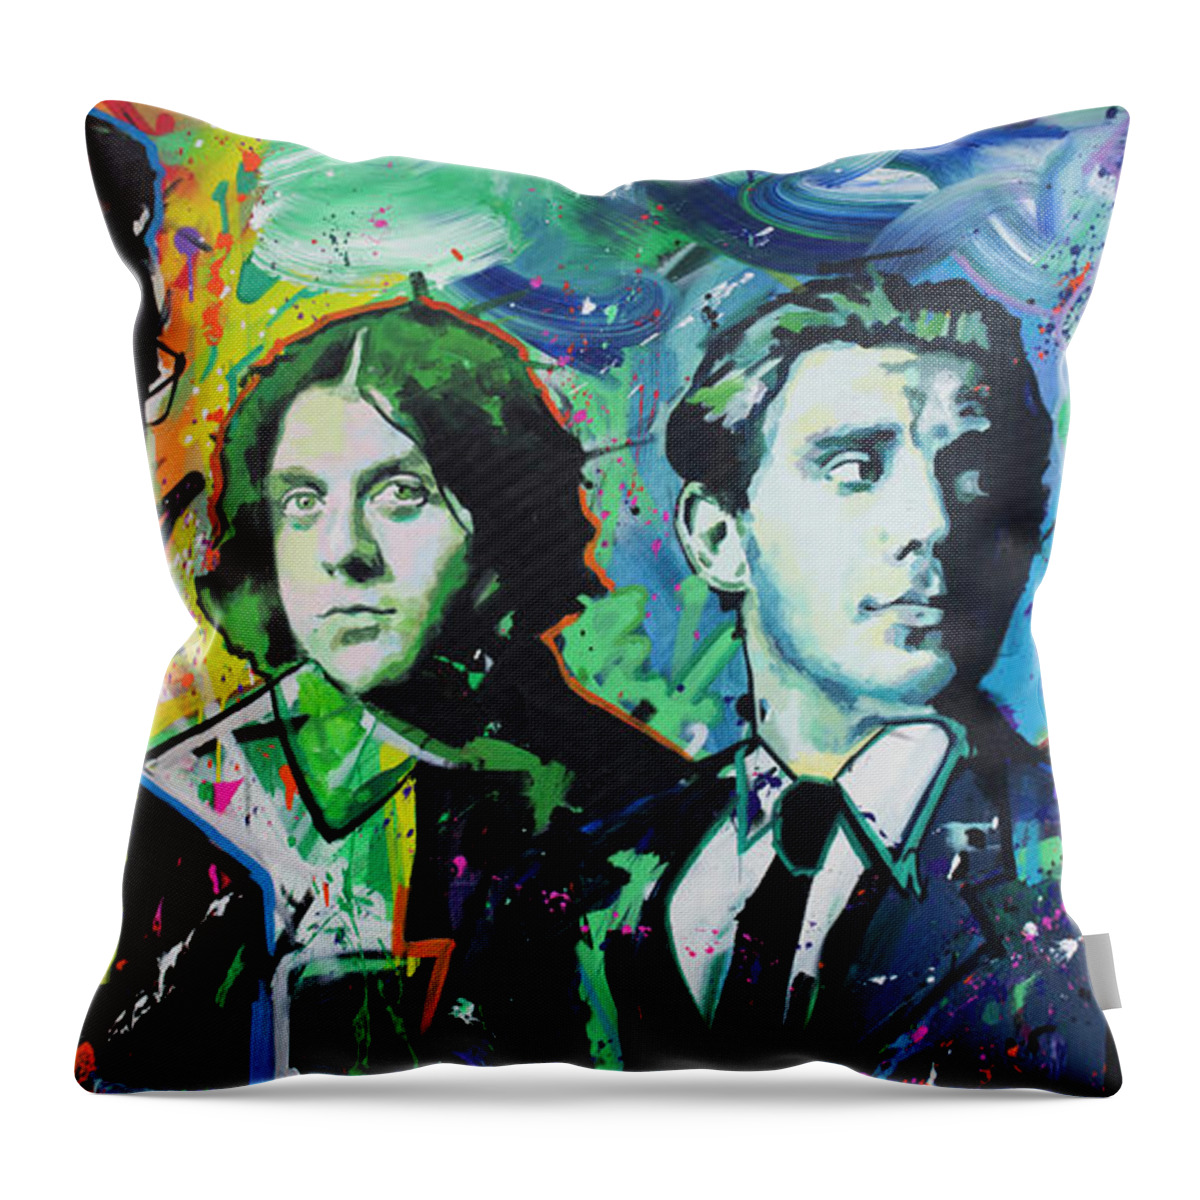 Arctic Monkeys Throw Pillow featuring the painting Arctic Monkeys by Richard Day